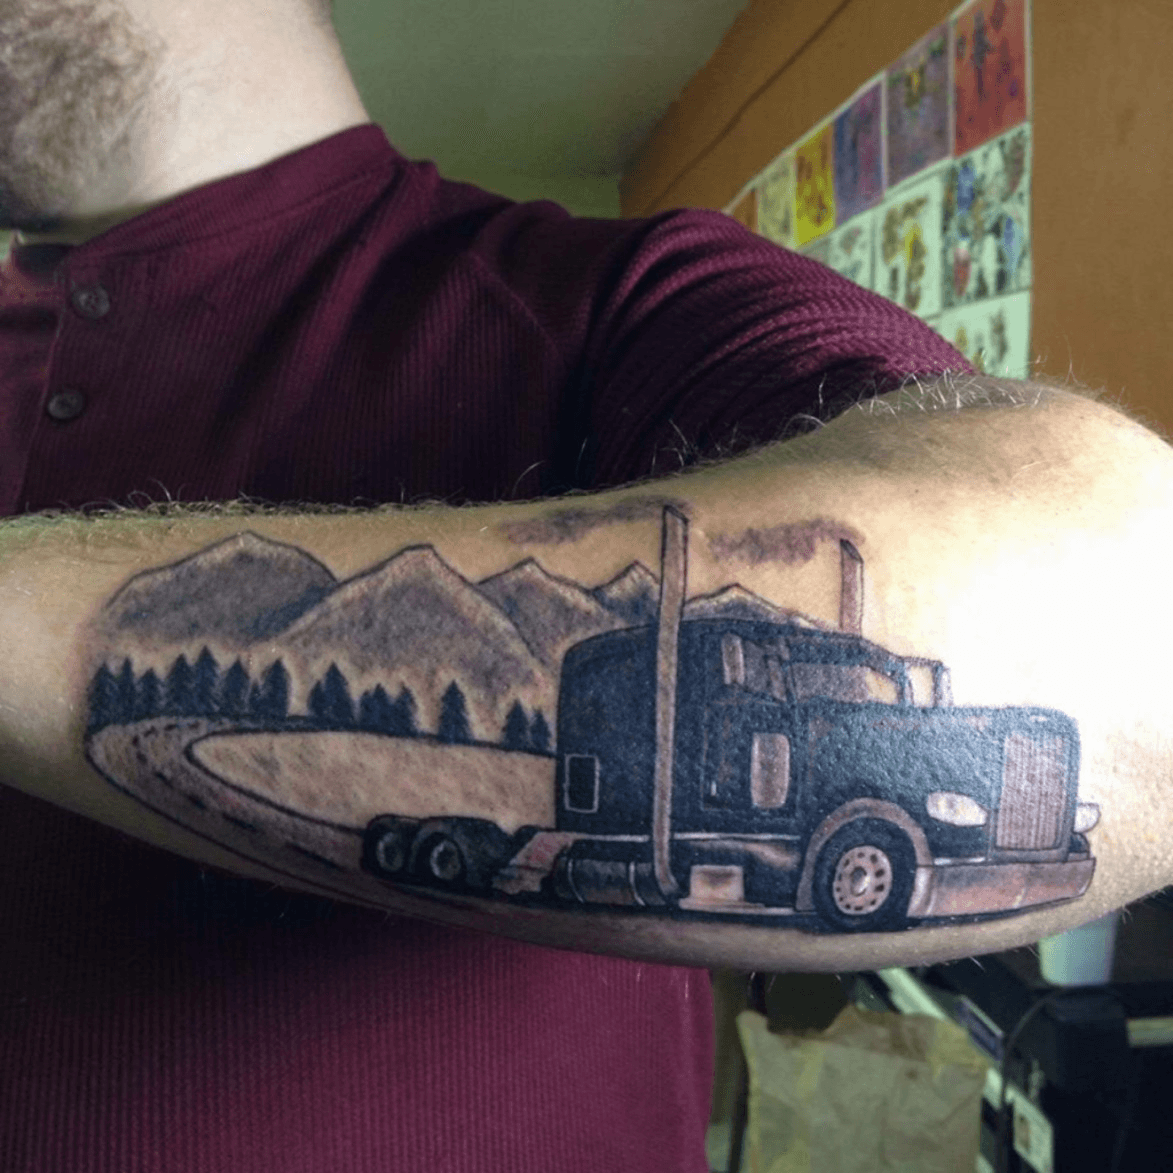 Vintage Karma - Ainslie finished this tattoo of Cynthia's family farm! With  Old Willys Overland Jeep truck and a 🦊! Thanks, Cynthia. 😊 | Facebook